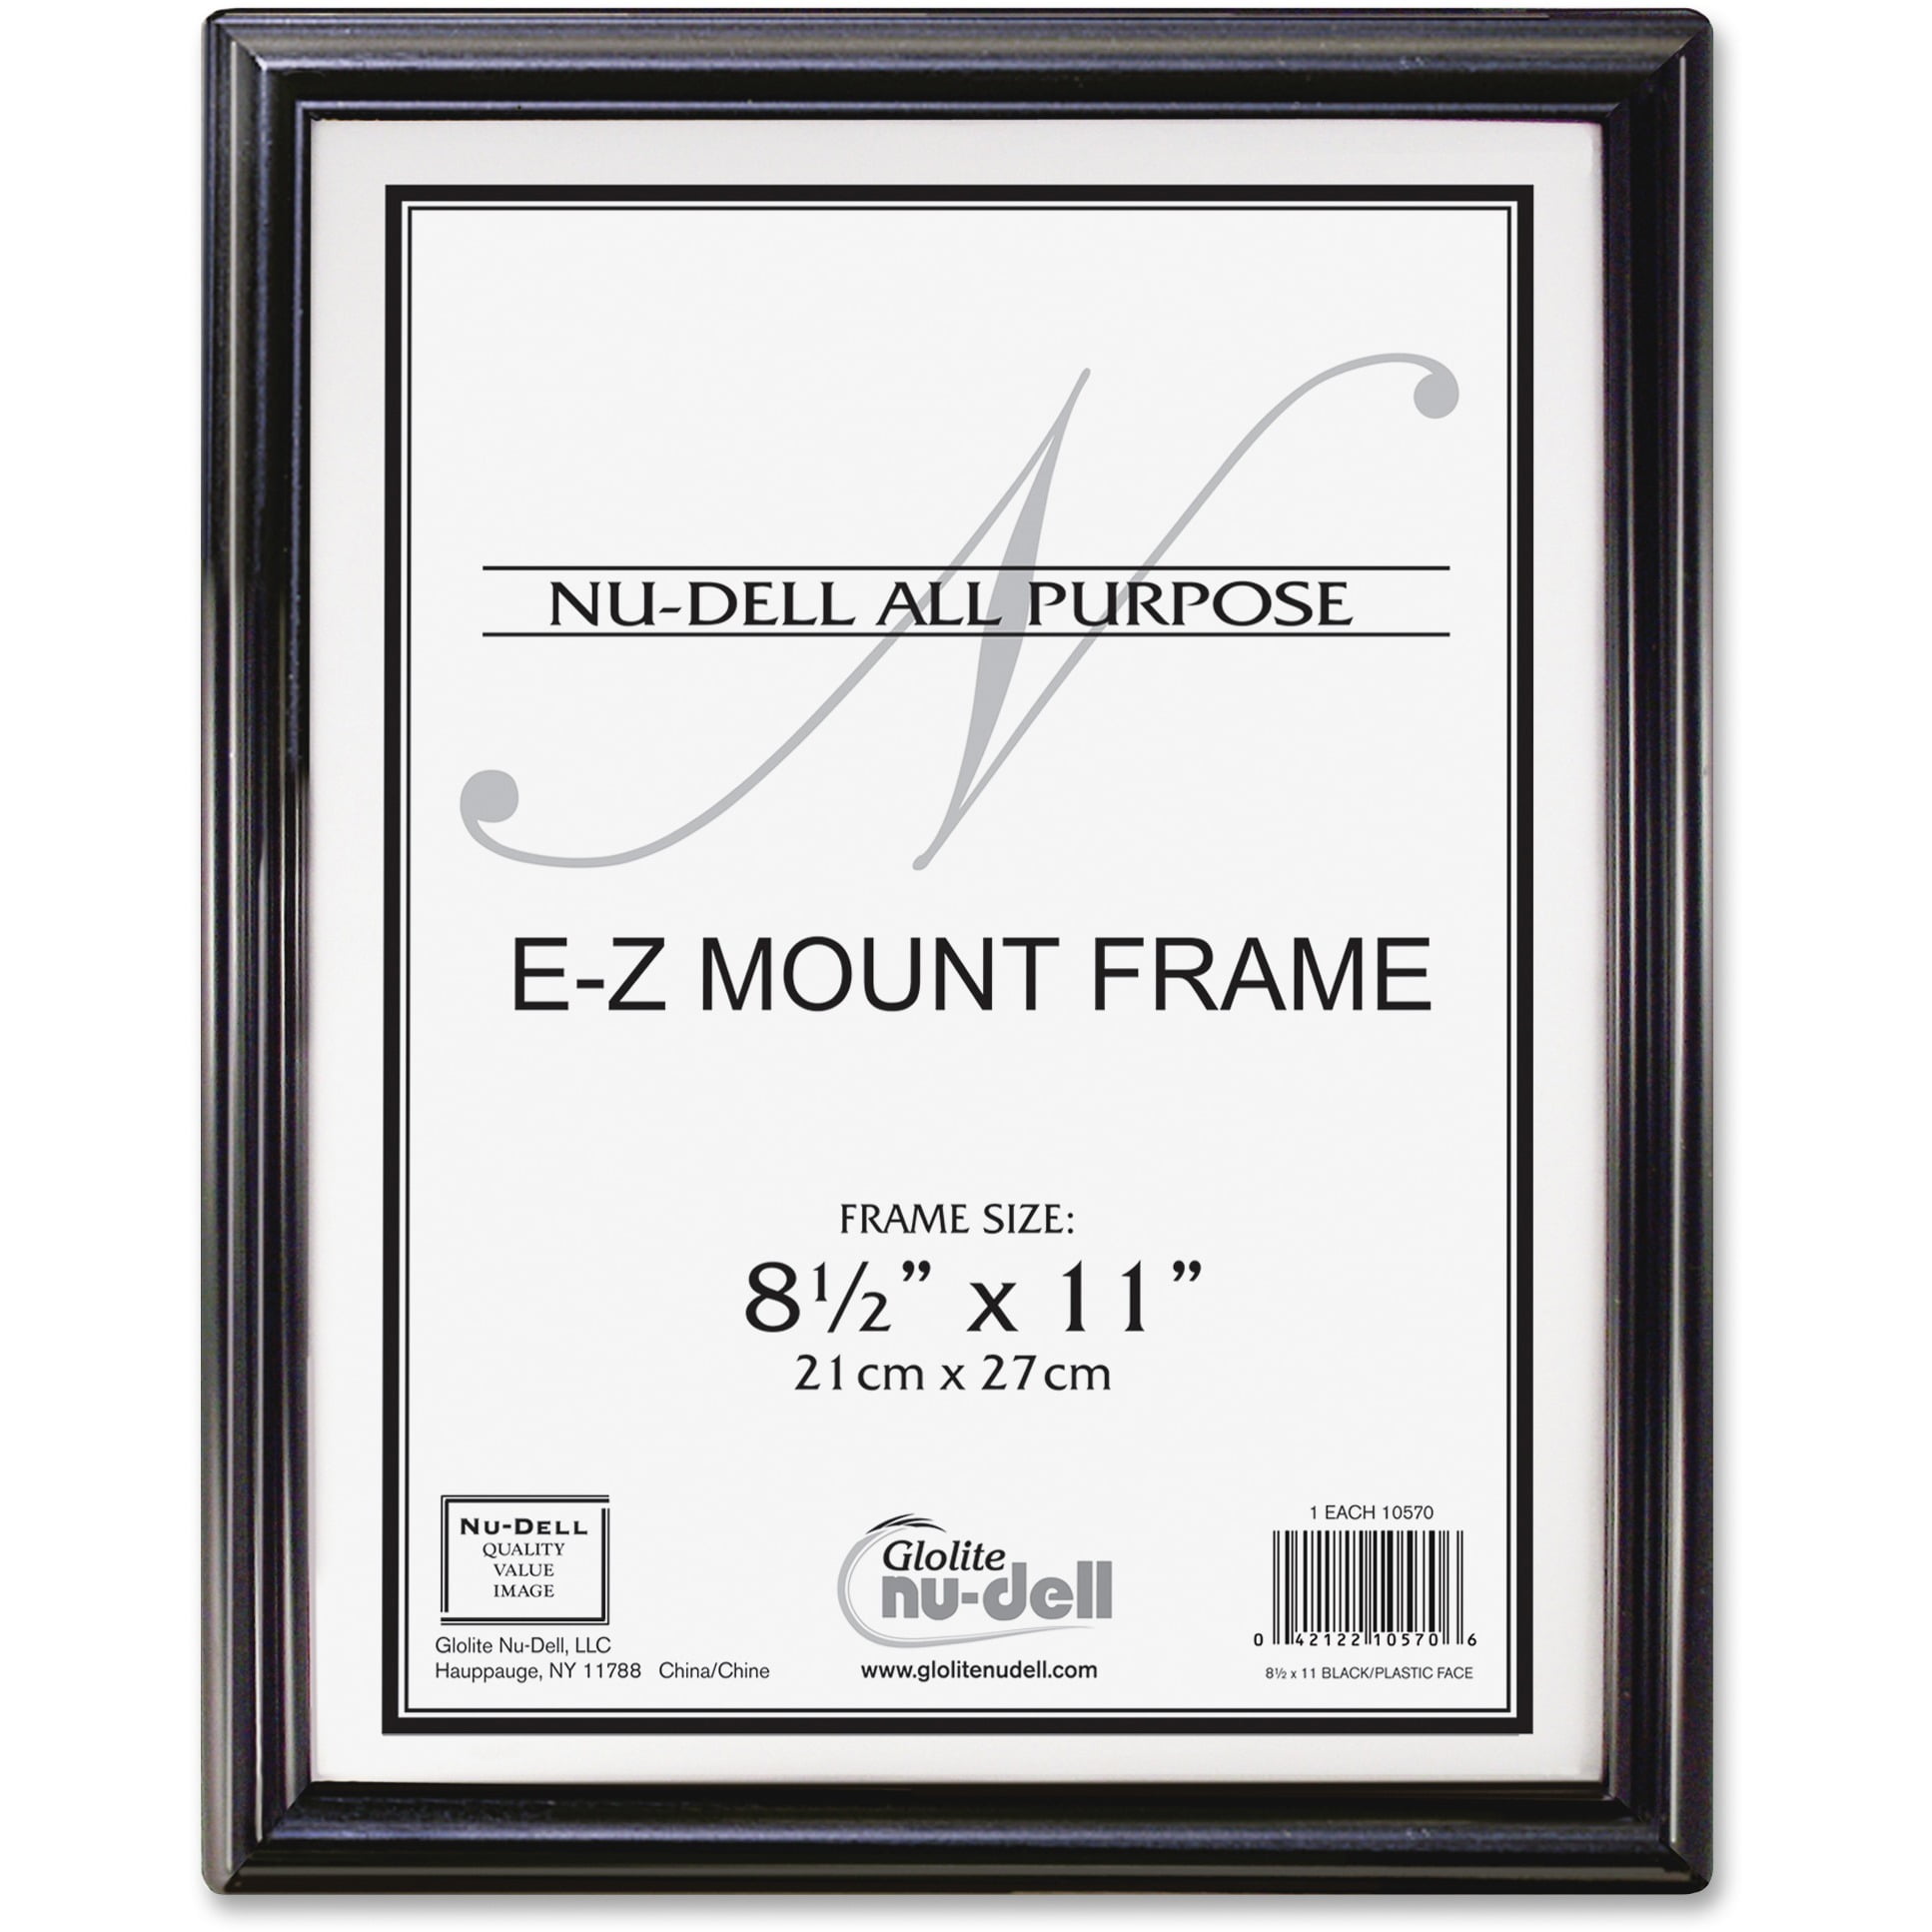 Pack of 6 MCS Economy Document Frames 8-1/2x11 Black with Gold Trim